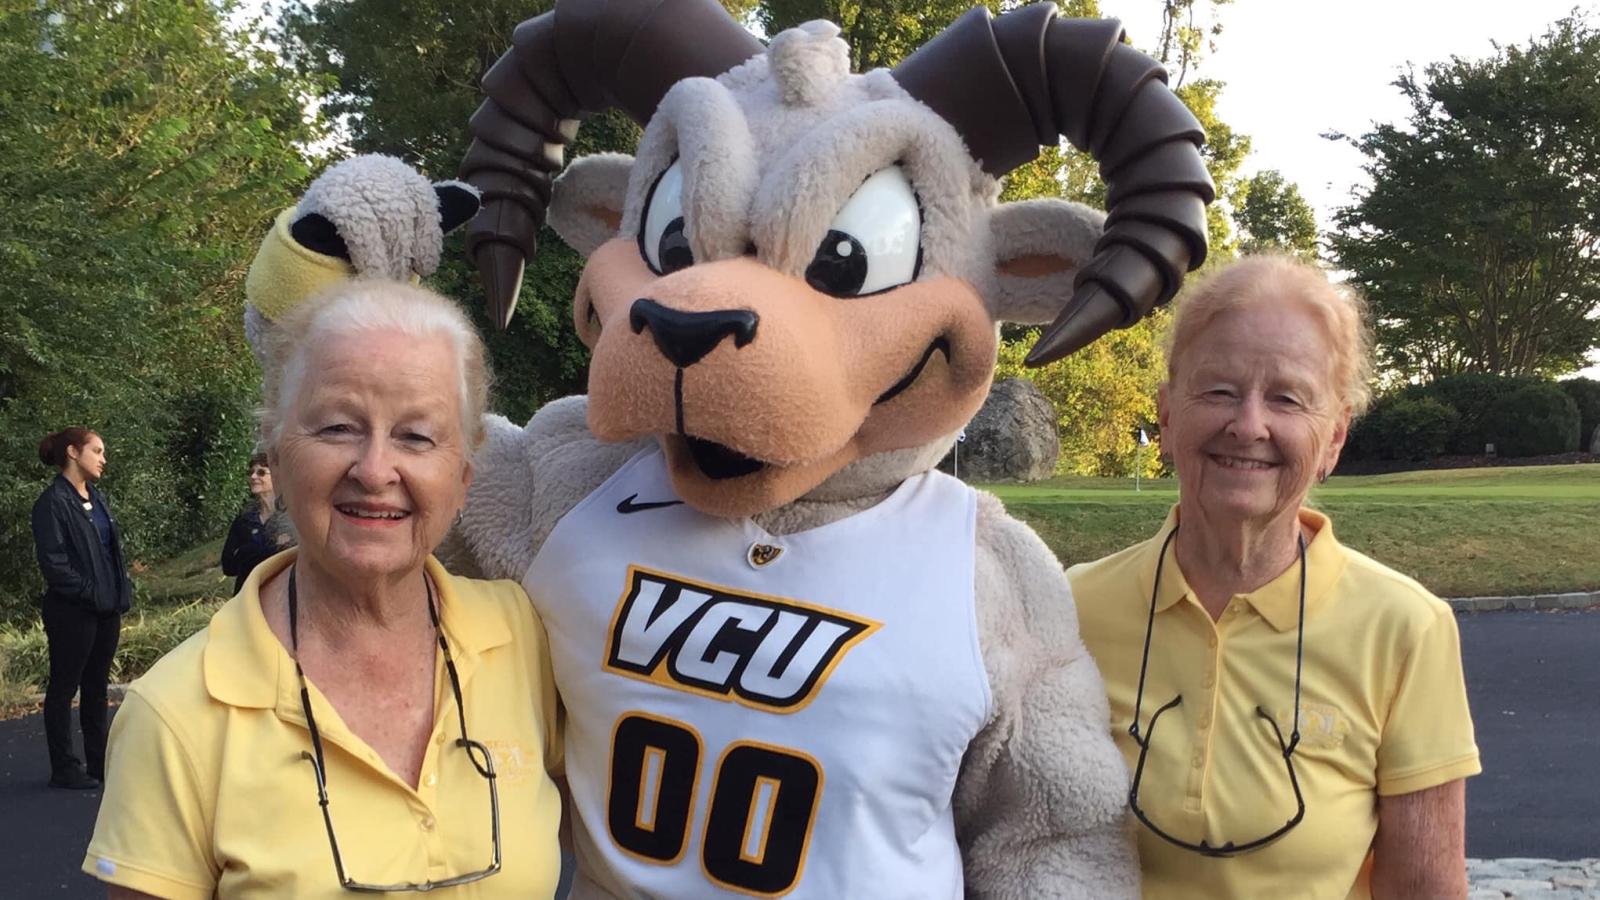 Jackie Jones Stone (left) and Jeanette Jones are avid sports fans. They have been to the US Open Tennis Championships 34 times and have followed VCU basketball for decades. Photo courtesy of Jeanette Jones